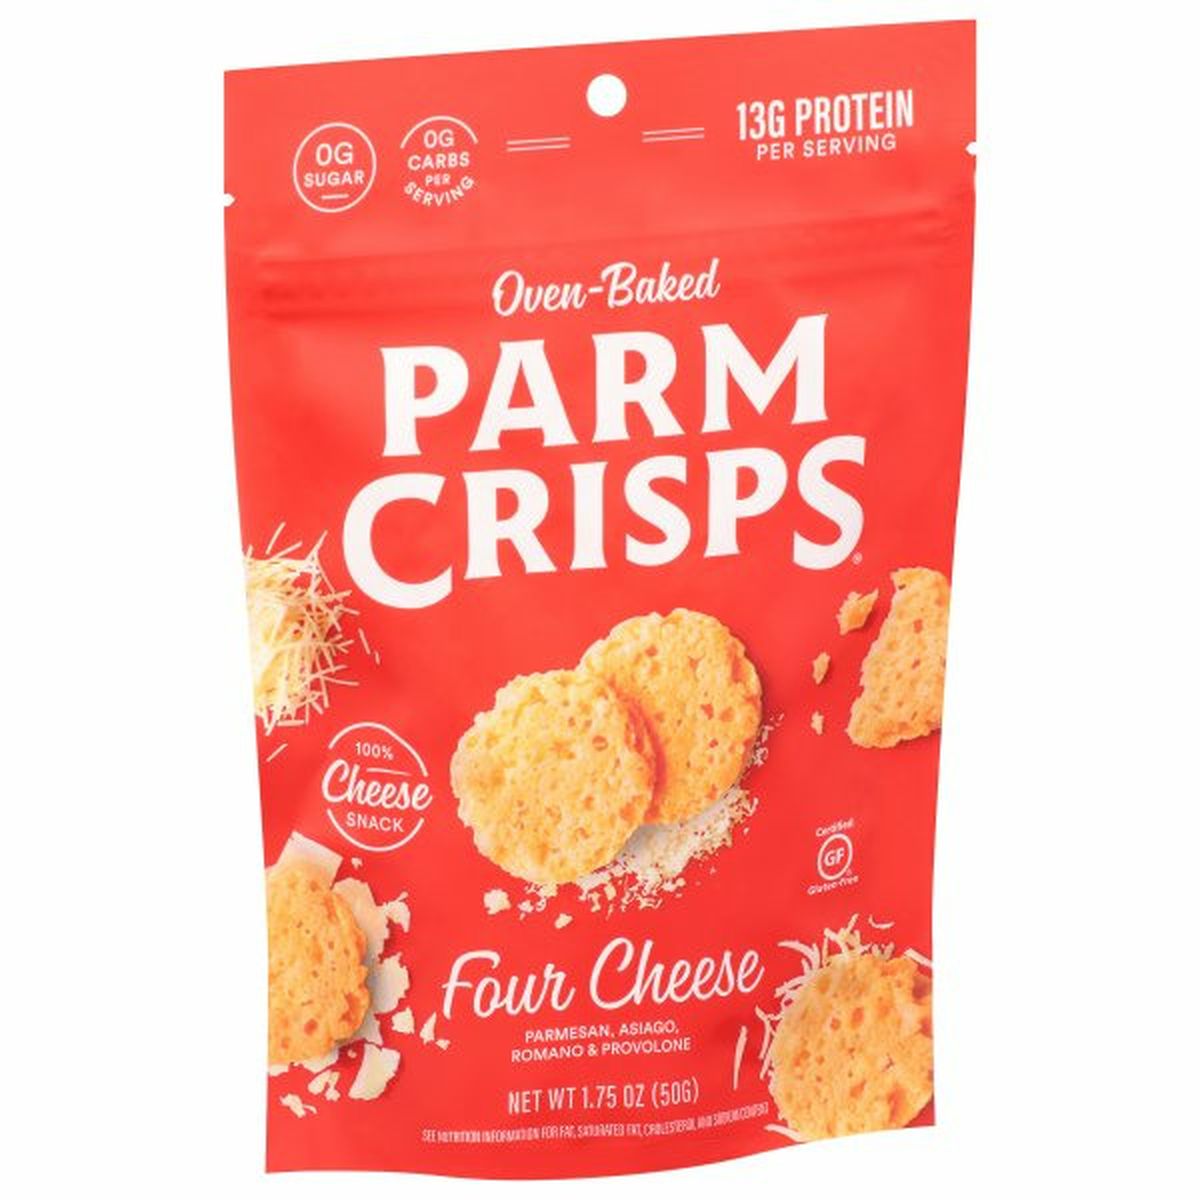 Calories in ParmCrisps Cheese Snack, Four Cheese, Oven-Baked